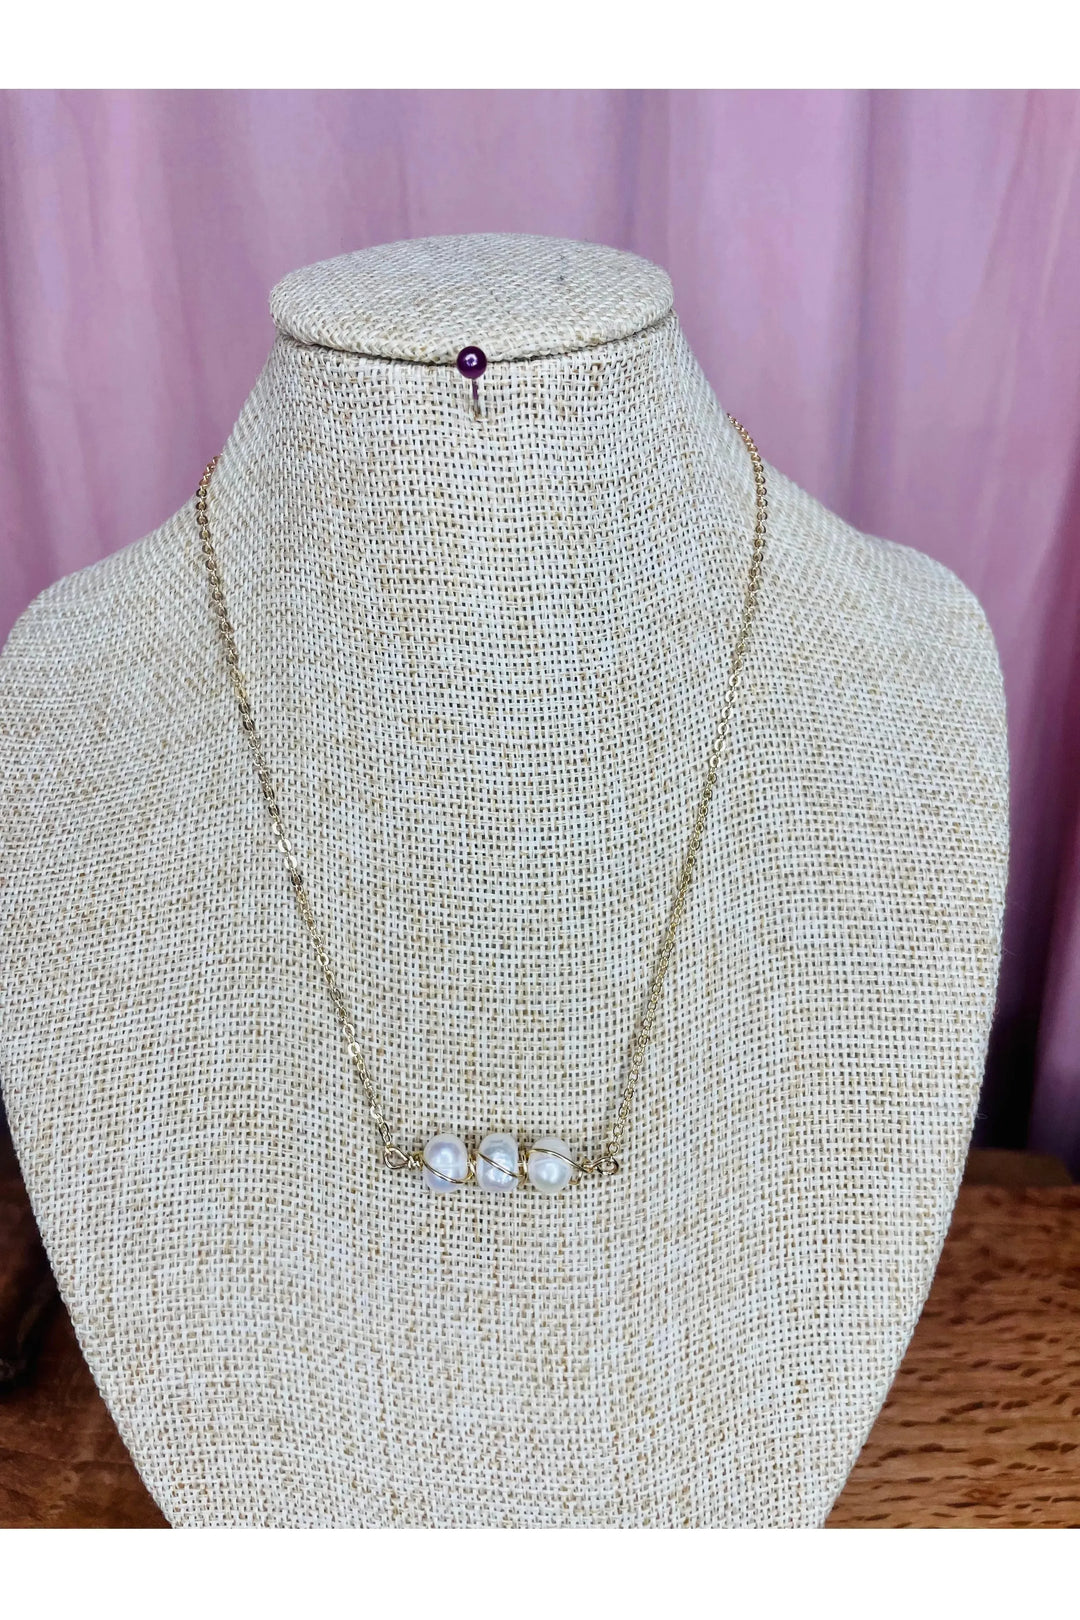 Wire Wrapped Fresh Water Pearl Necklace - Vintage Dragonfly Boutique